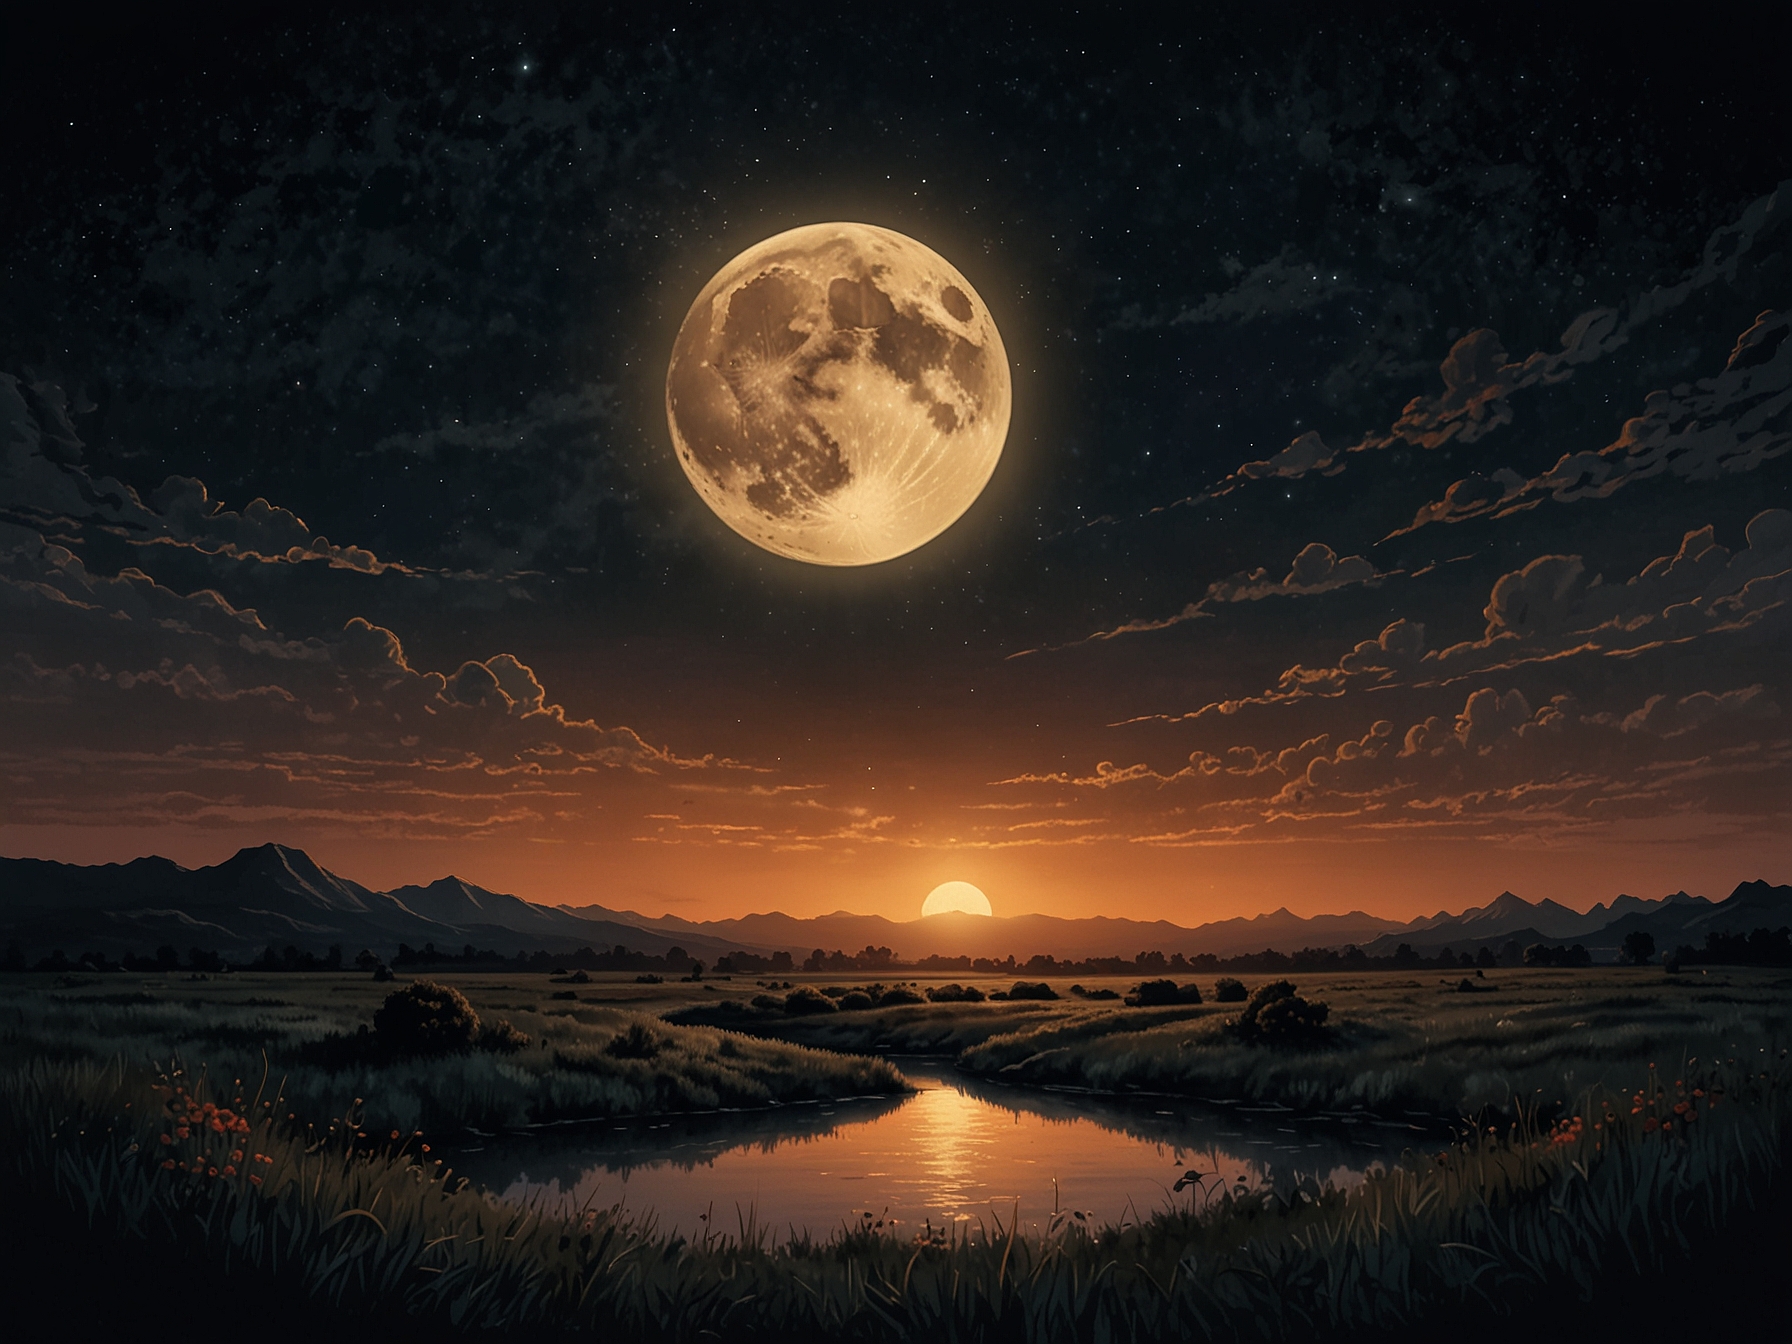 An illustration of the full Strawberry Moon rising above a tranquil landscape, casting a golden hue. The clear night sky and minimal light pollution allow for an unobstructed view of the moon in its full glory.